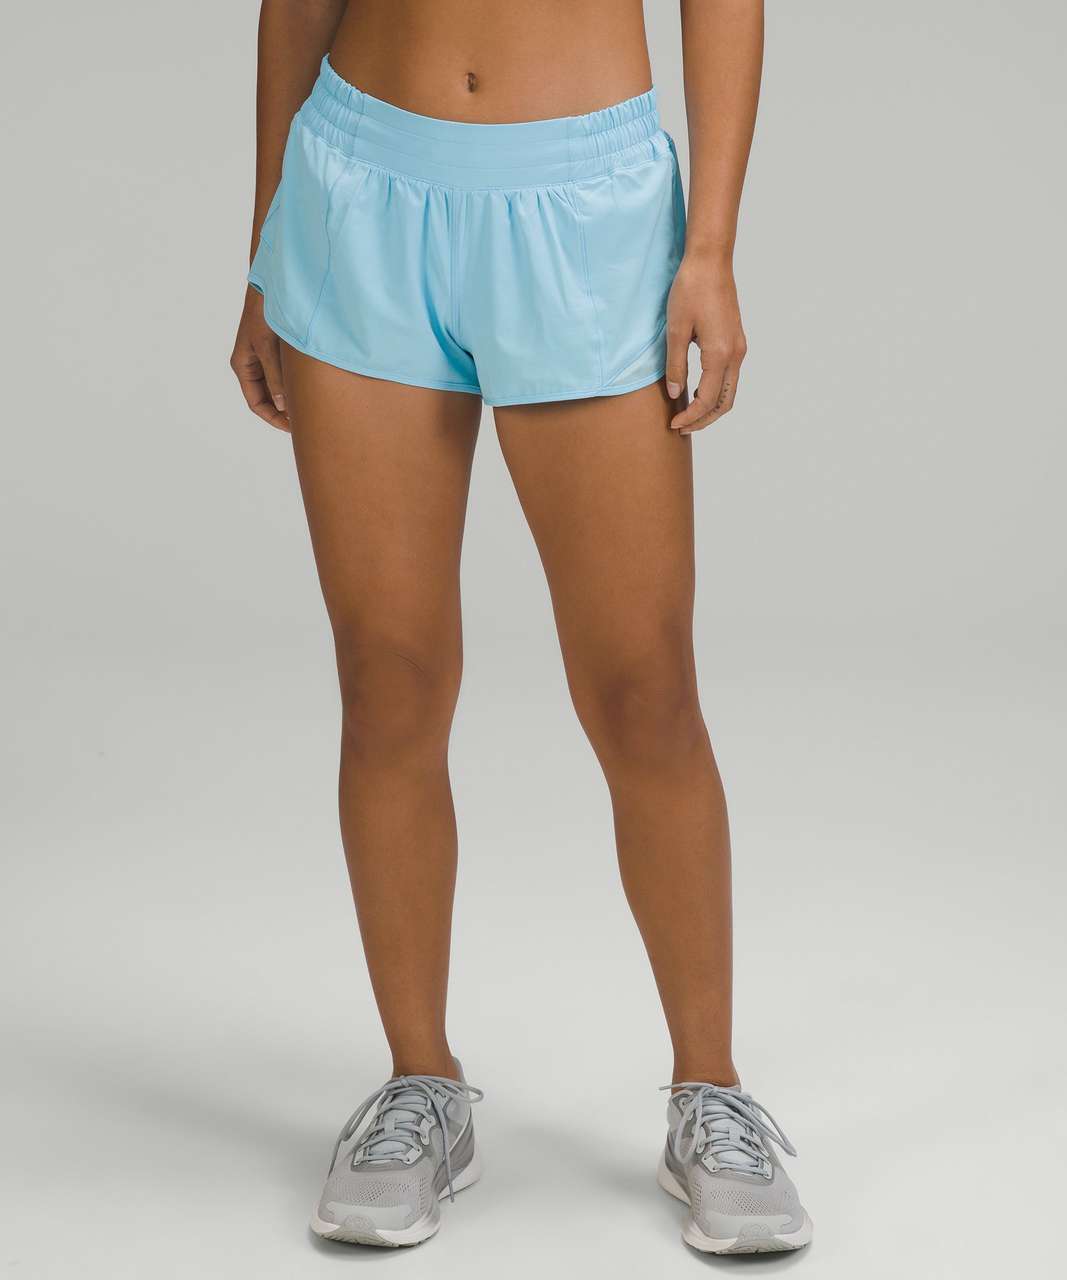 Lululemon Hotty Hot Low-Rise Lined Short 2.5" - Blue Chill